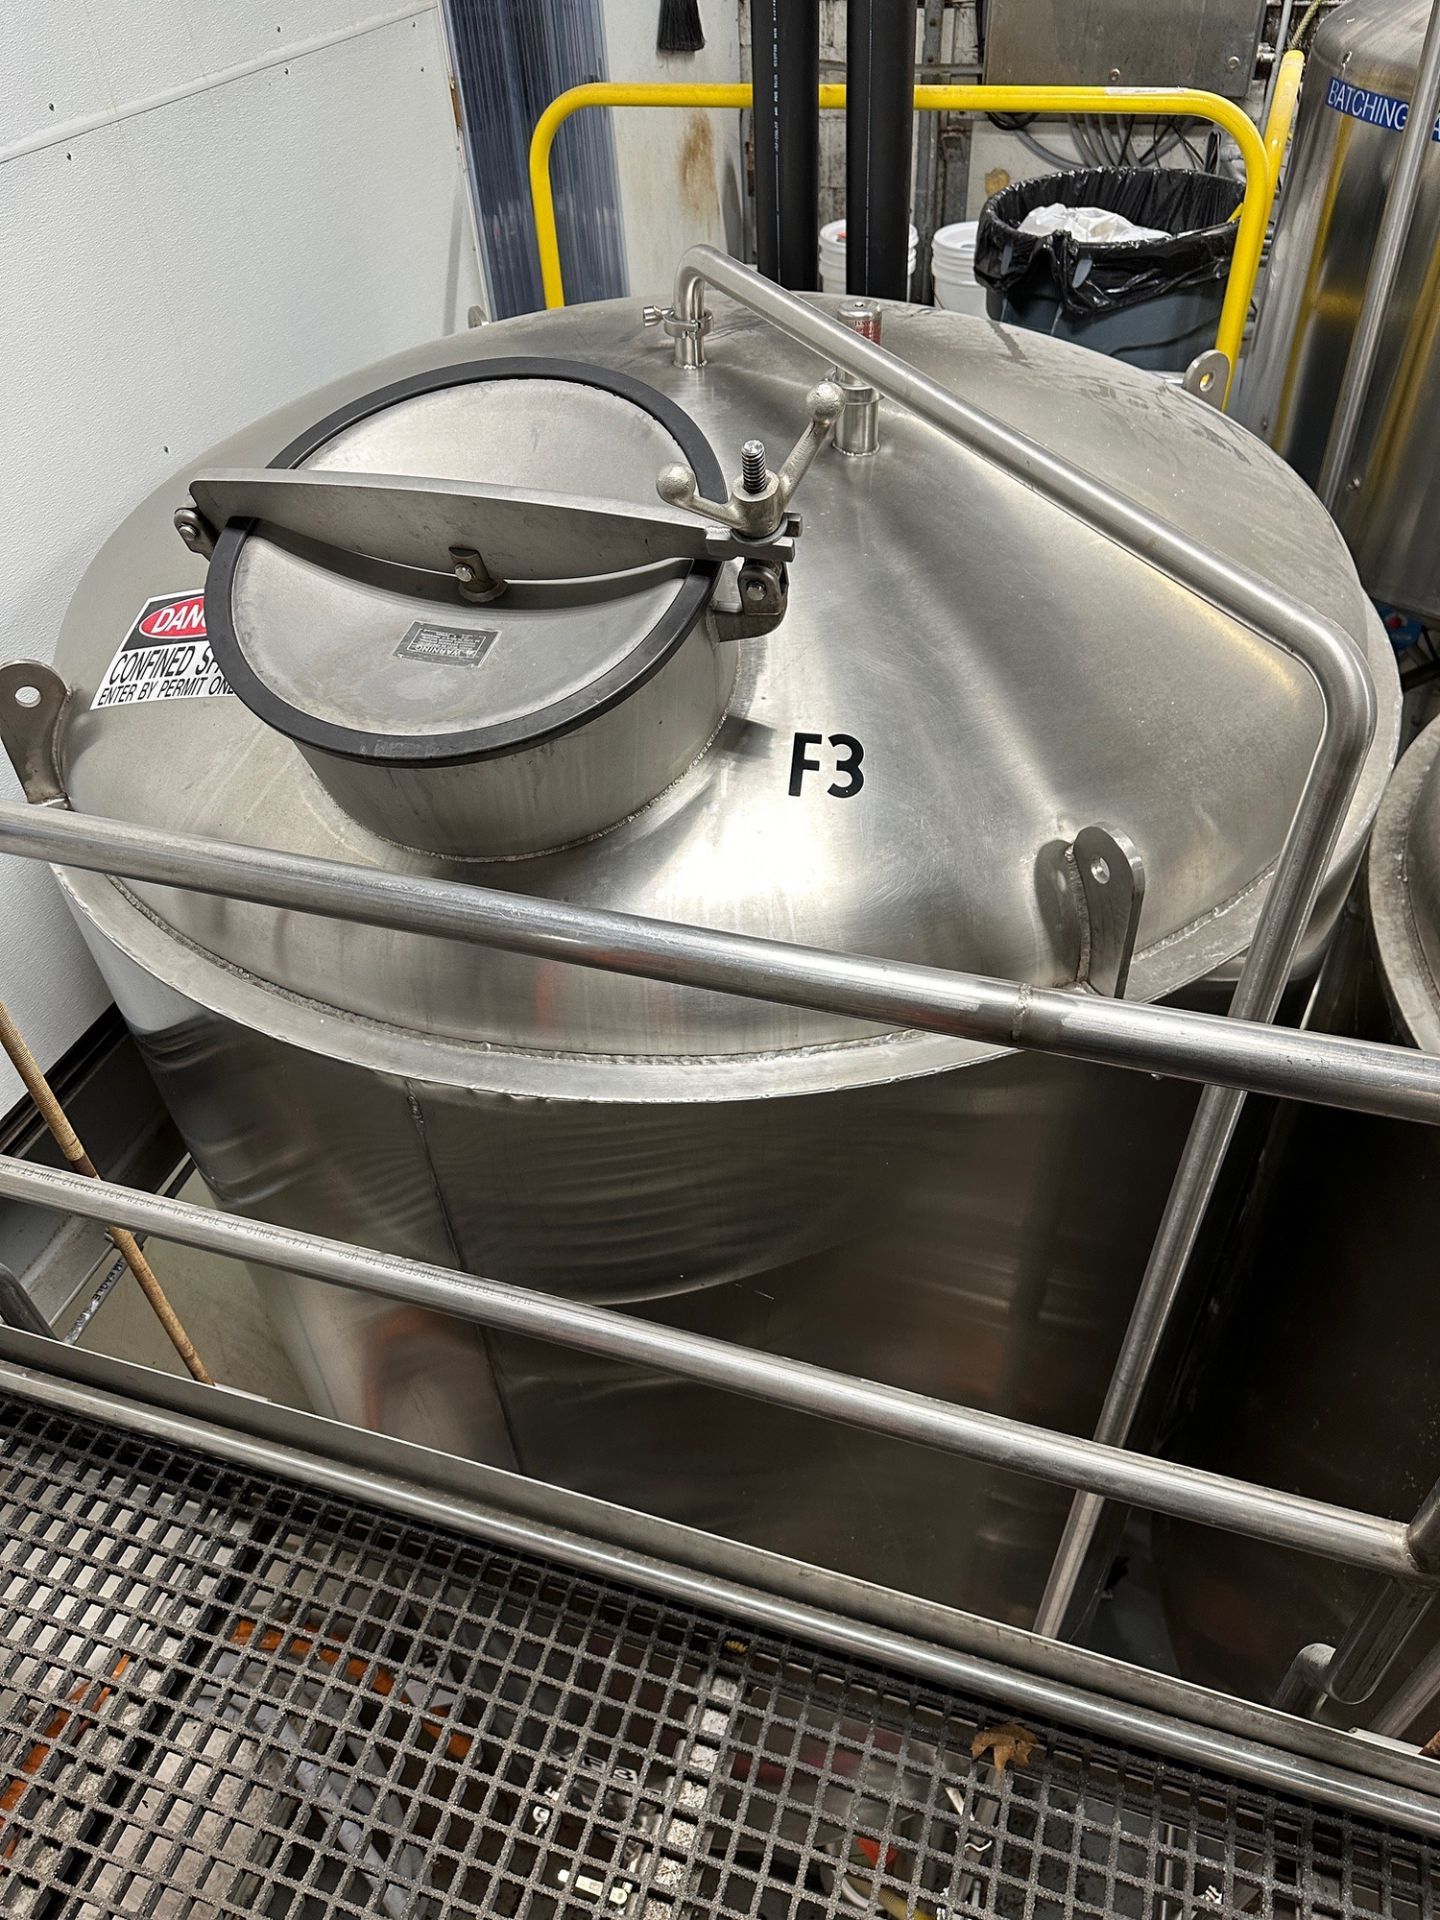 McCann 70 BBL Stainless Steel Fermentation Tank (F3) - Cone Bottom, Glycol Jacketed | Rig Fee $1400 - Image 4 of 4